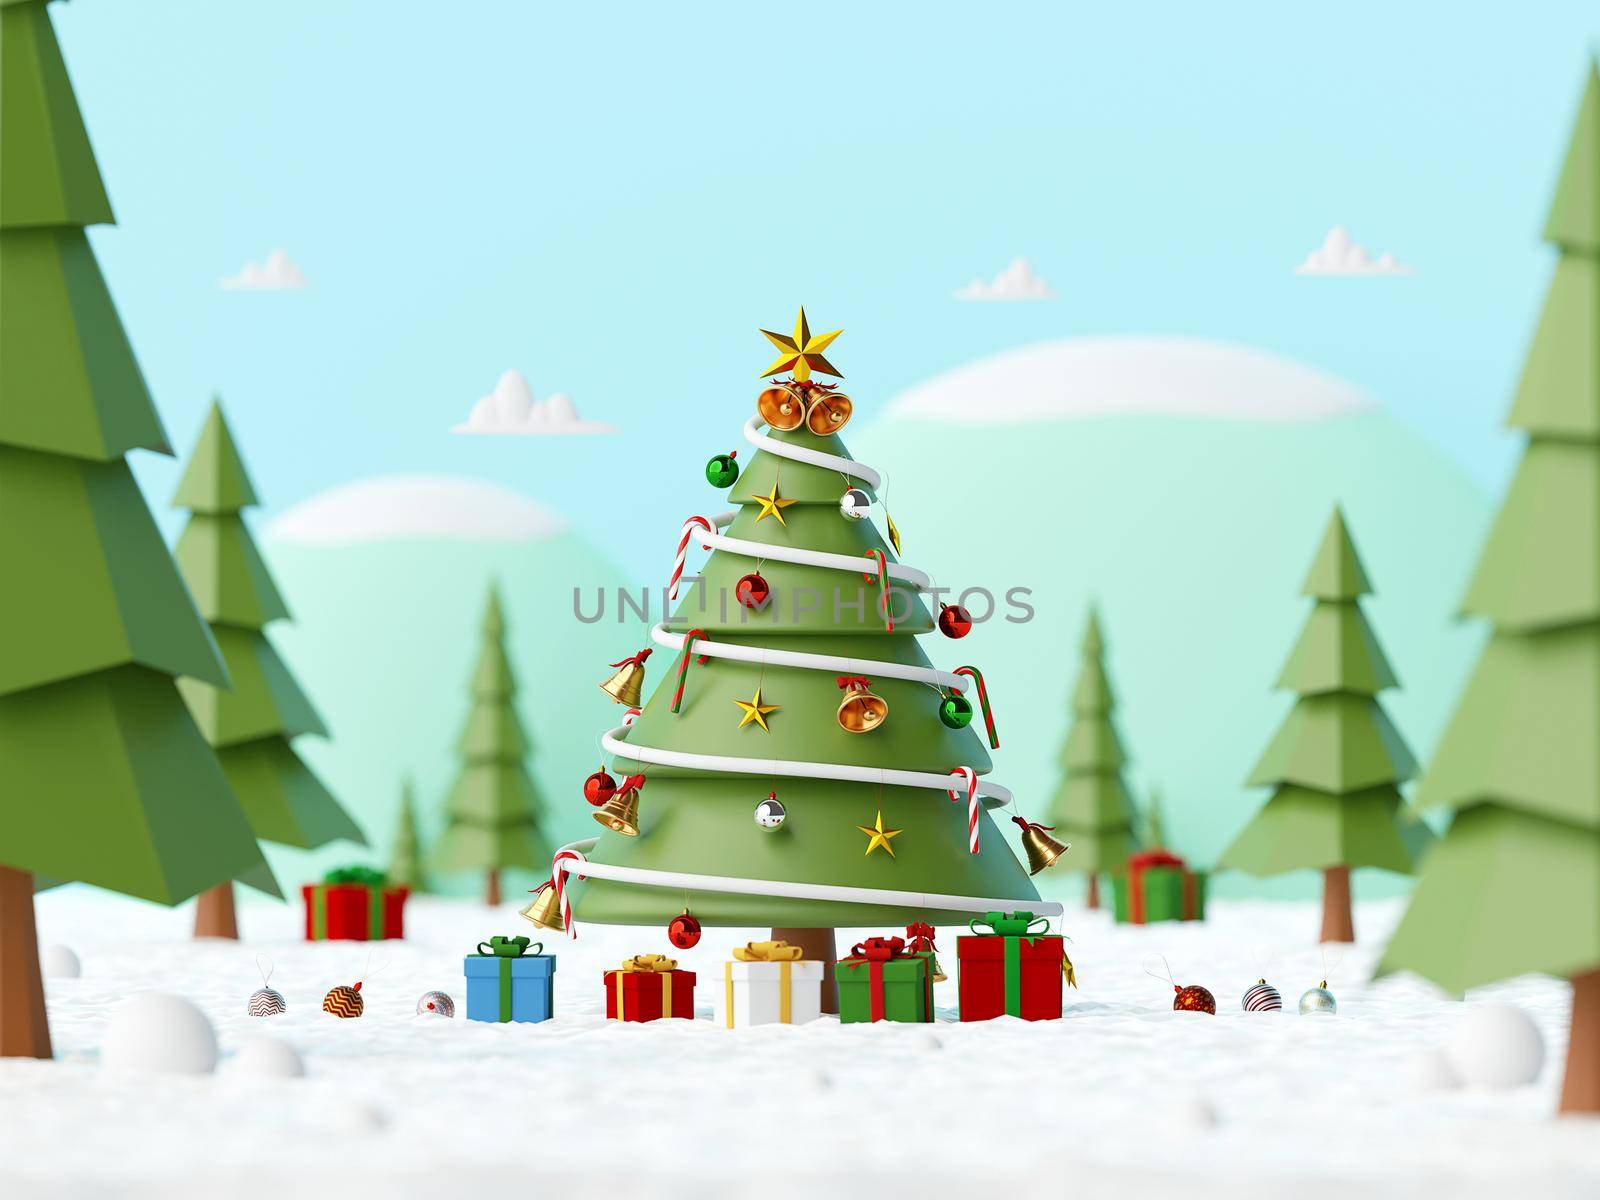 Merry Christmas and Happy New Year, Landscape of Decorated Christmas Tree with gifts on a snowy ground in the forest, 3d rendering by nutzchotwarut